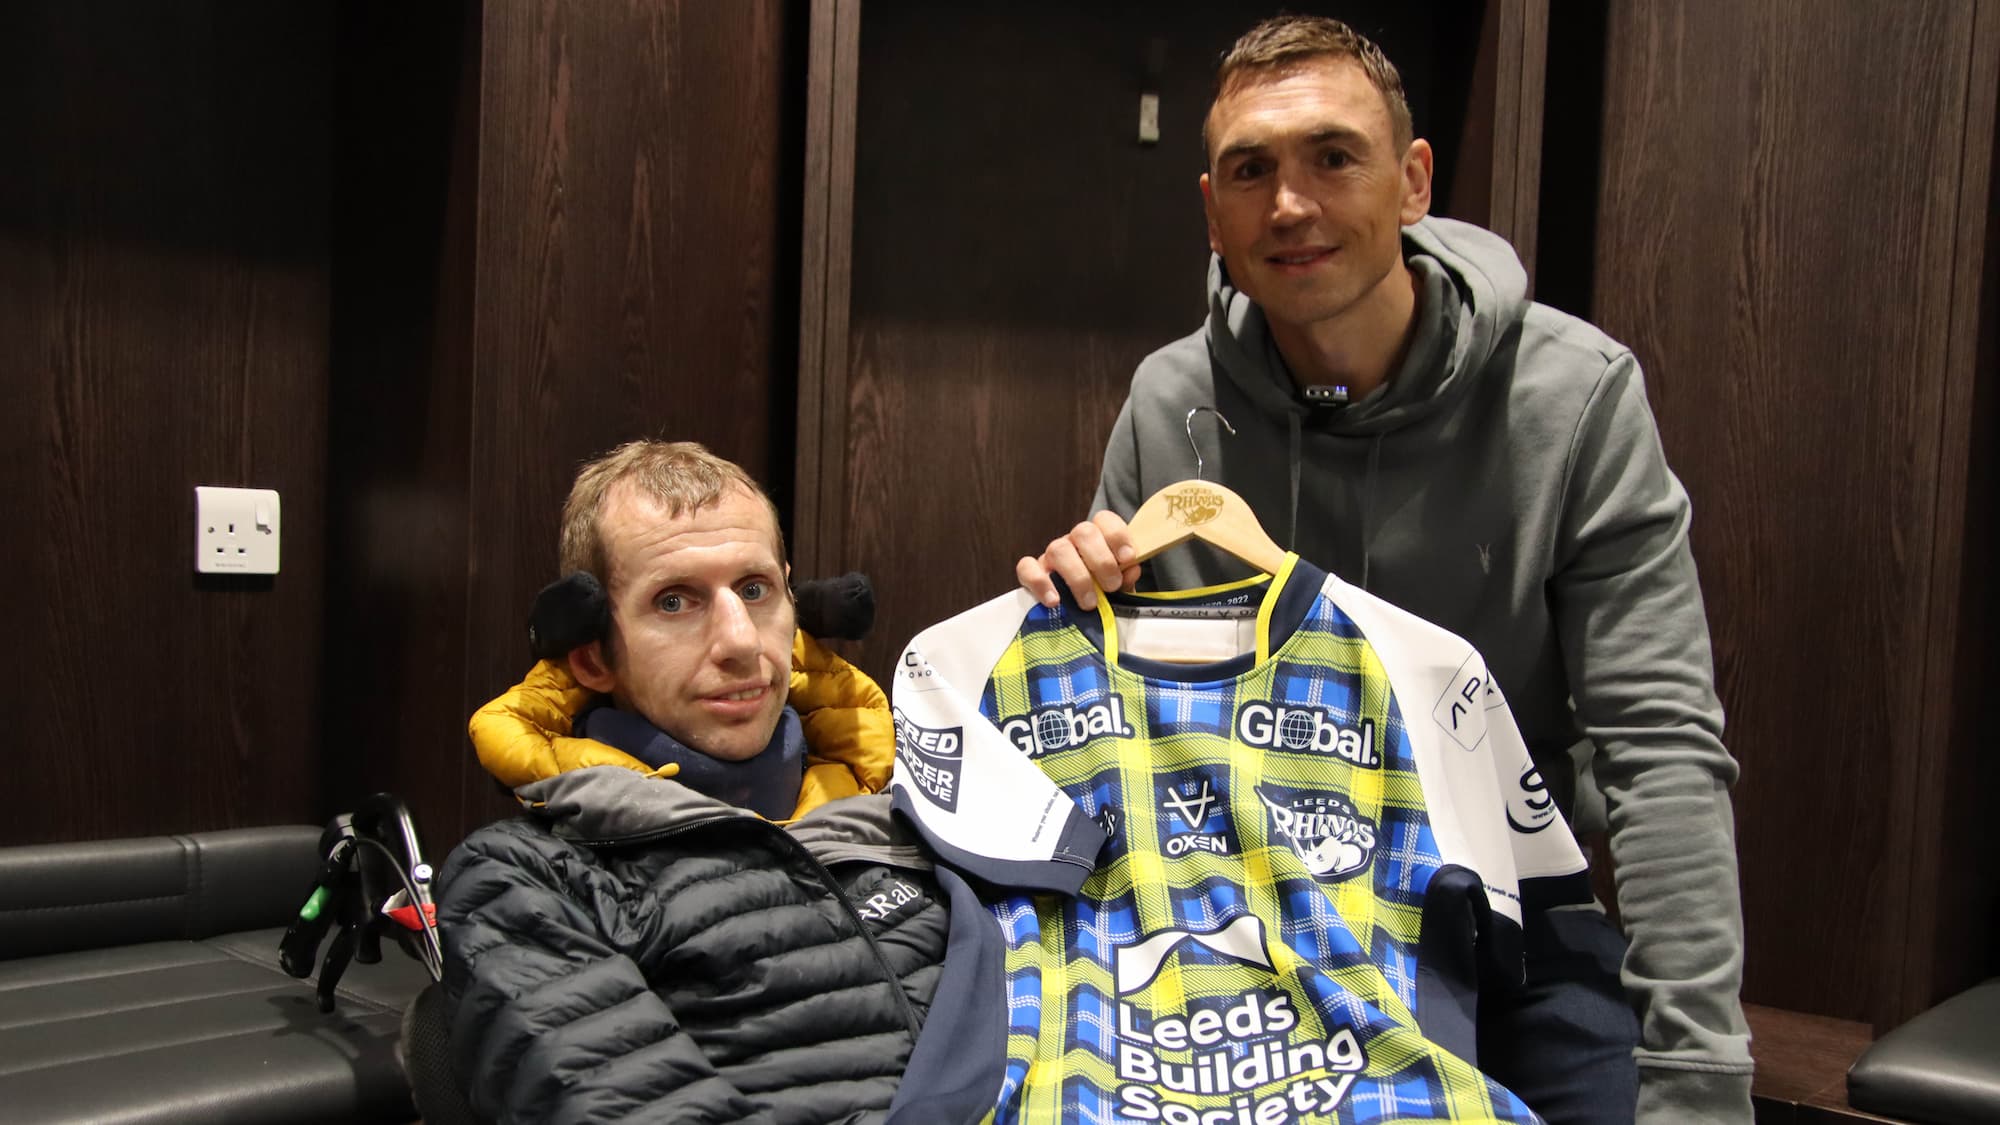 Rob Burrow and Kevin Sinfield holding Doddie shirt.